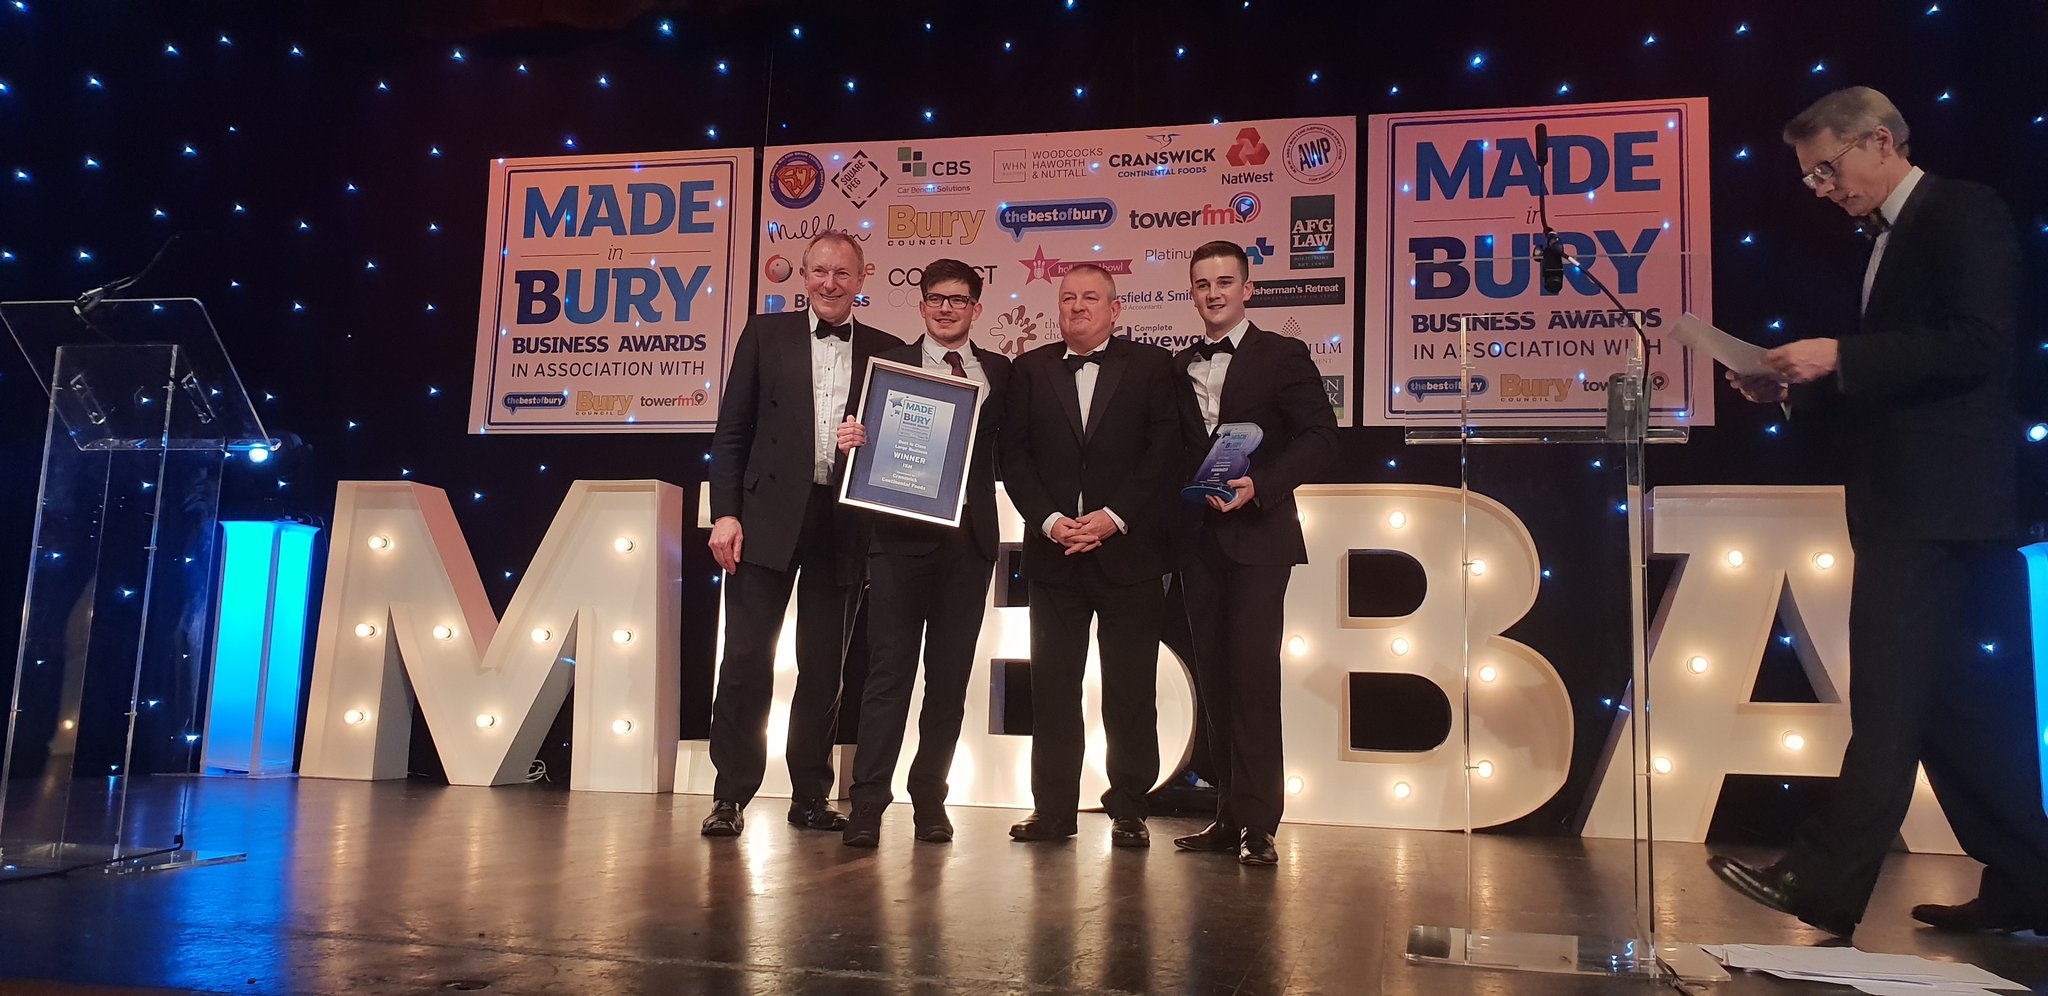 ISM presented with Large Business Award at Made in Bury Business Awards 2019